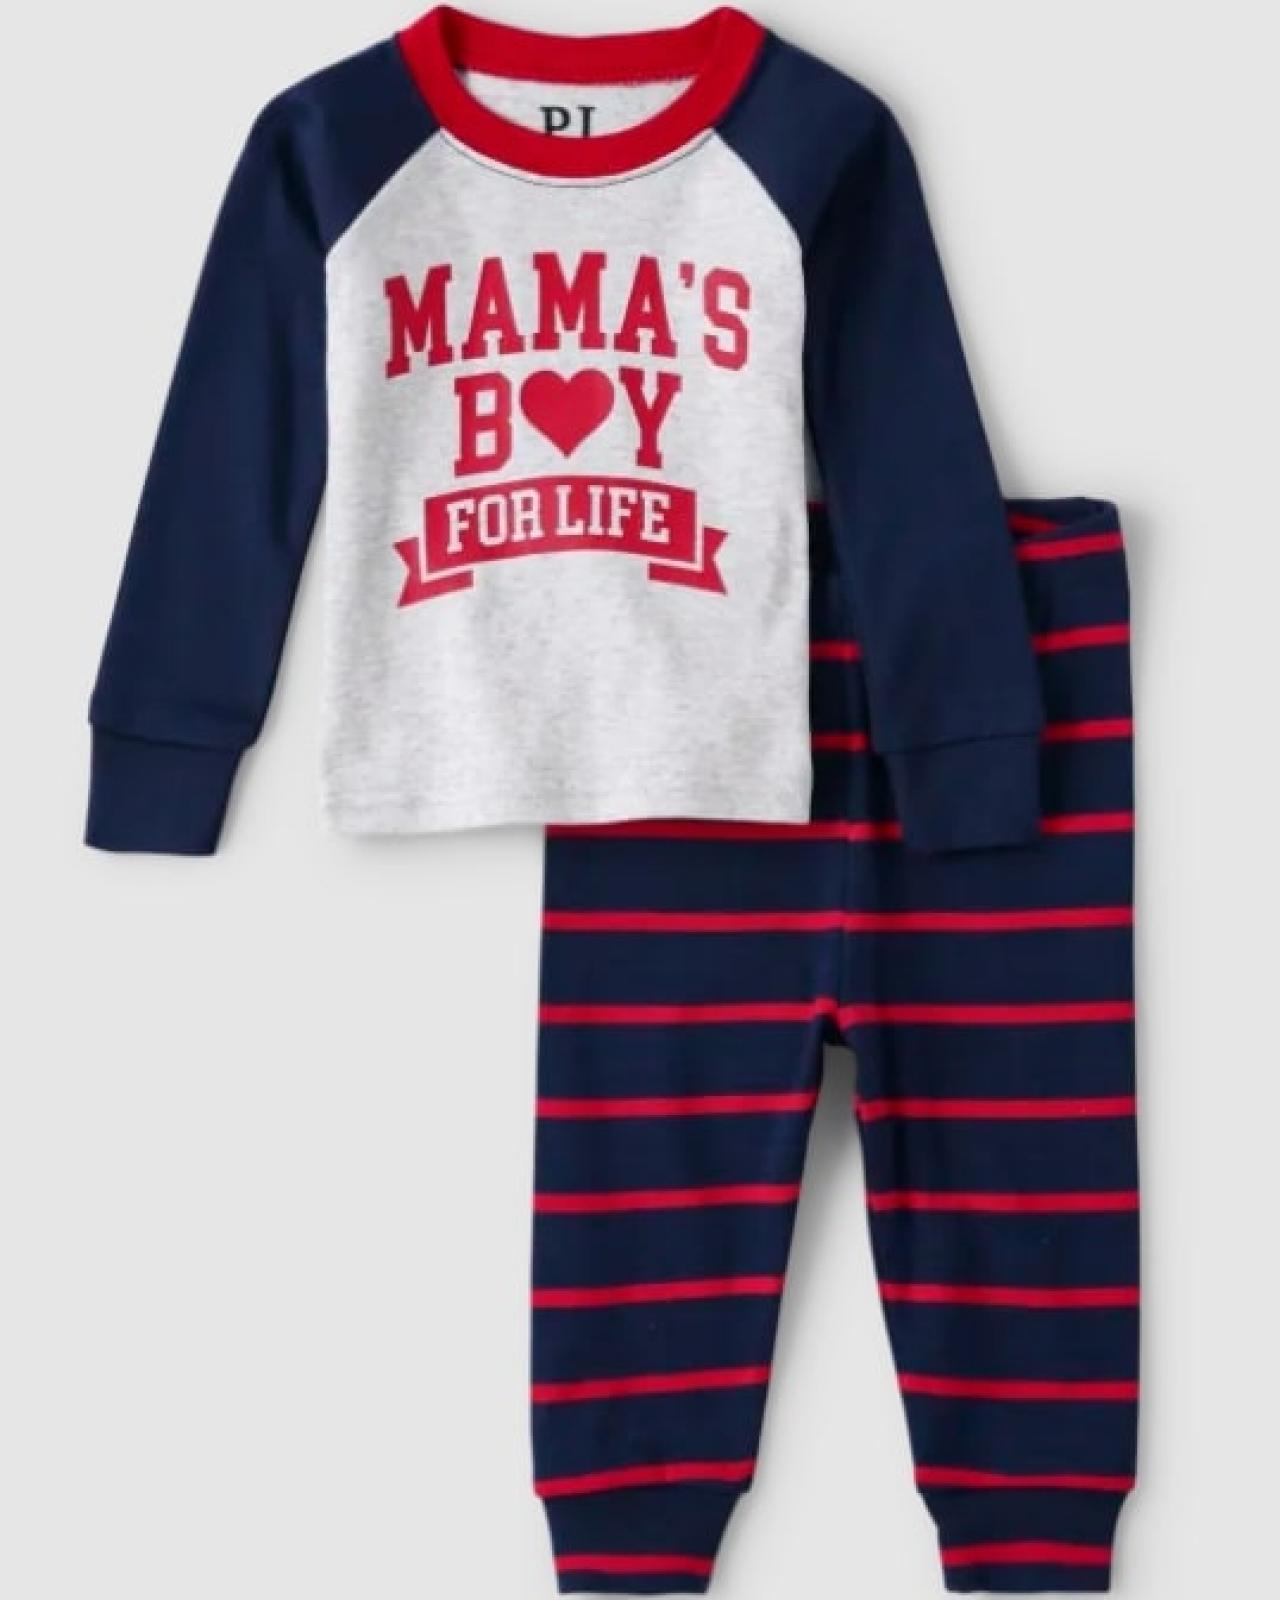 13 Valentine's Day Pajamas You'll Fall in Love With - Tinybeans